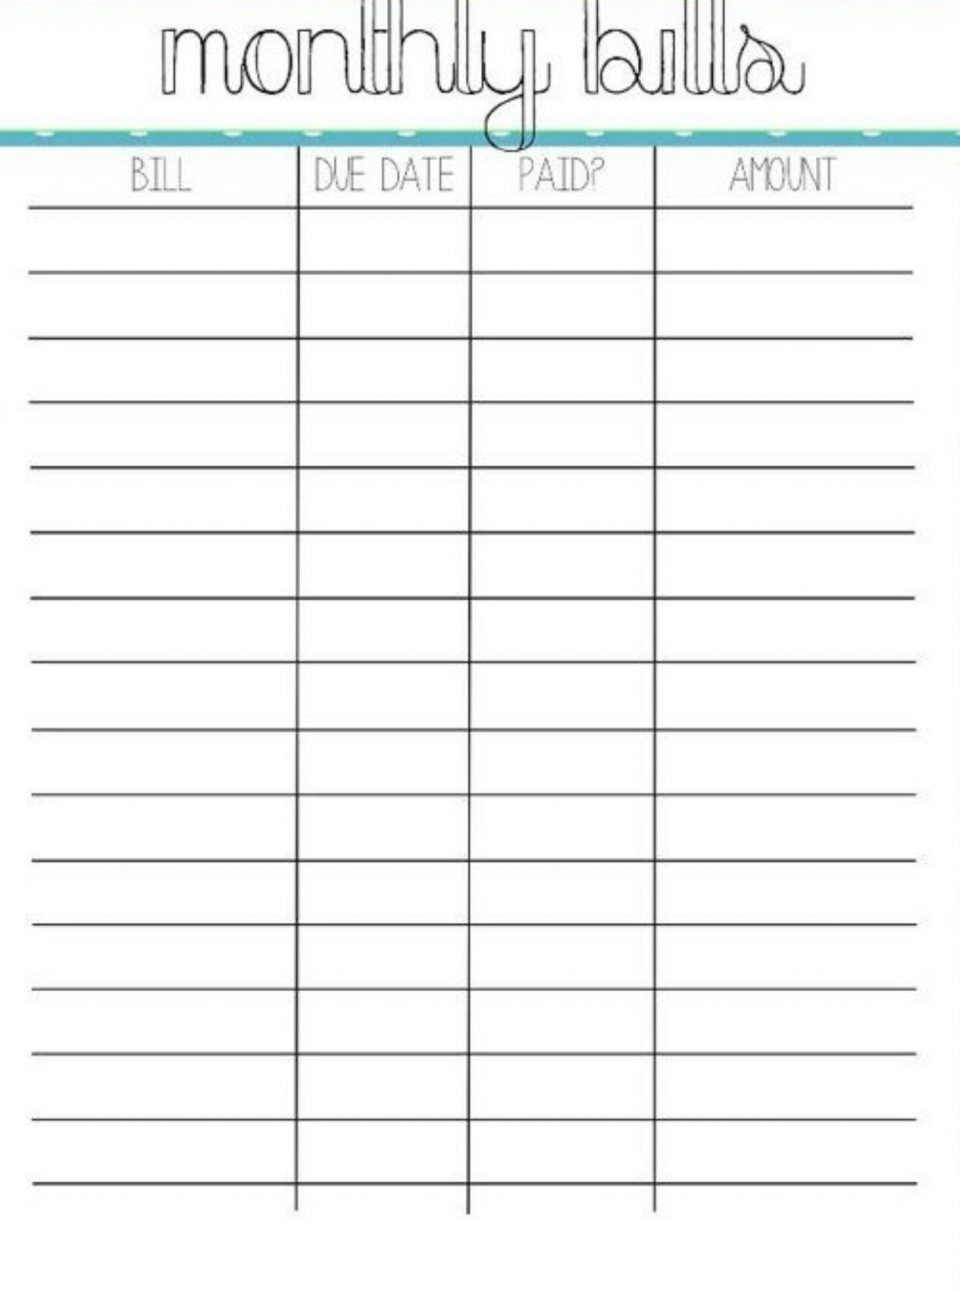 Monthly Bill Sample With Free Printable Organizer Template  Free Downloadable Monthly Payment Spreedsheet